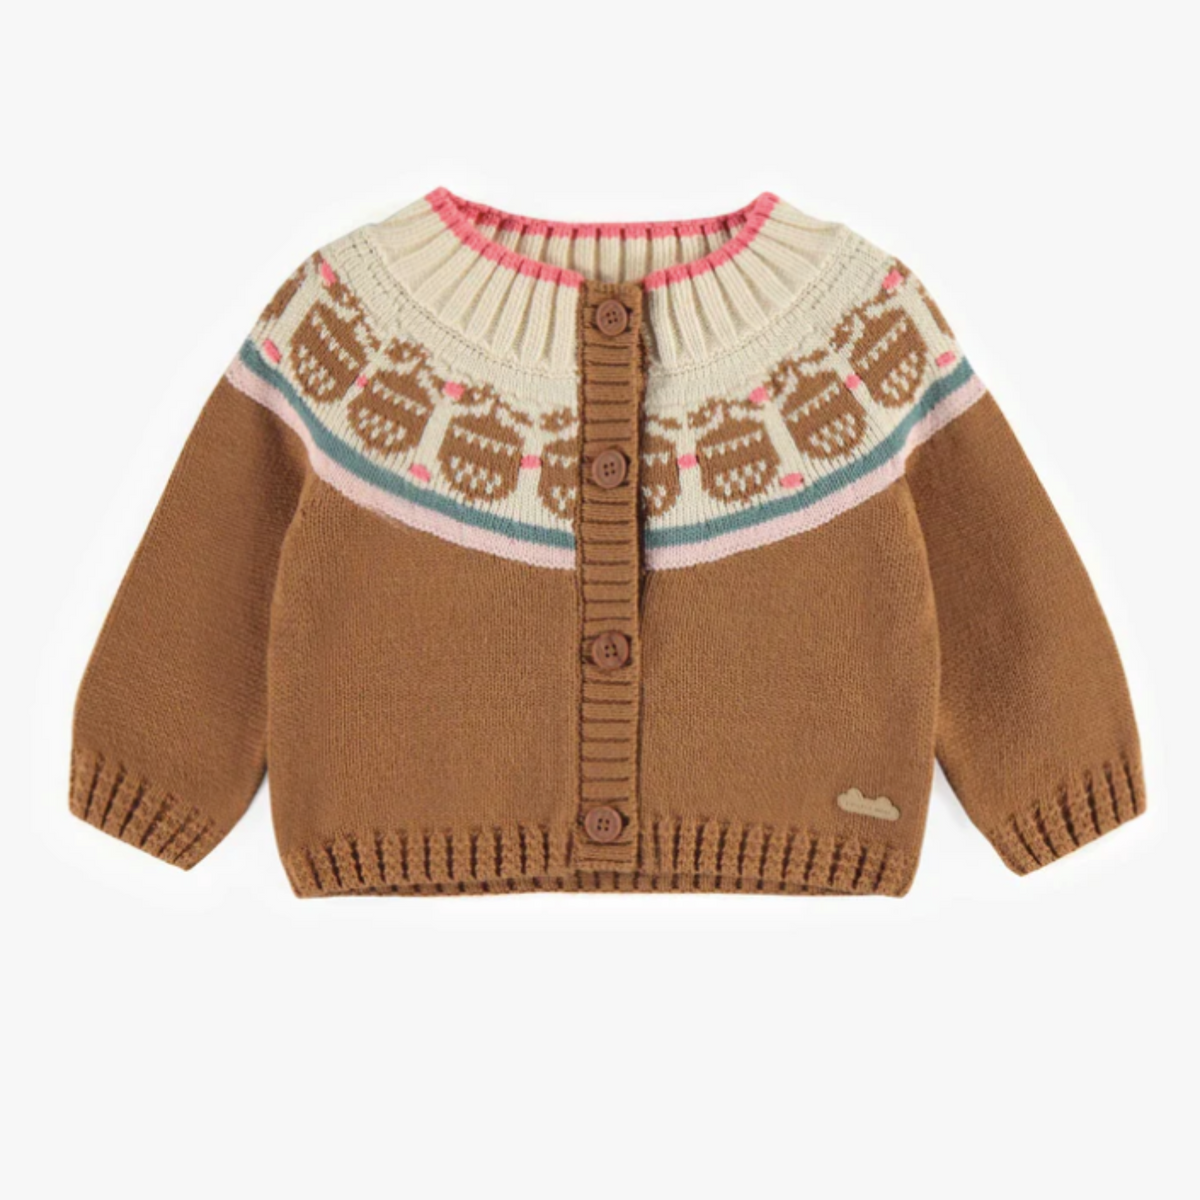 Brown Patterned Knitted Vest in Cotton Cashmere, Toddler